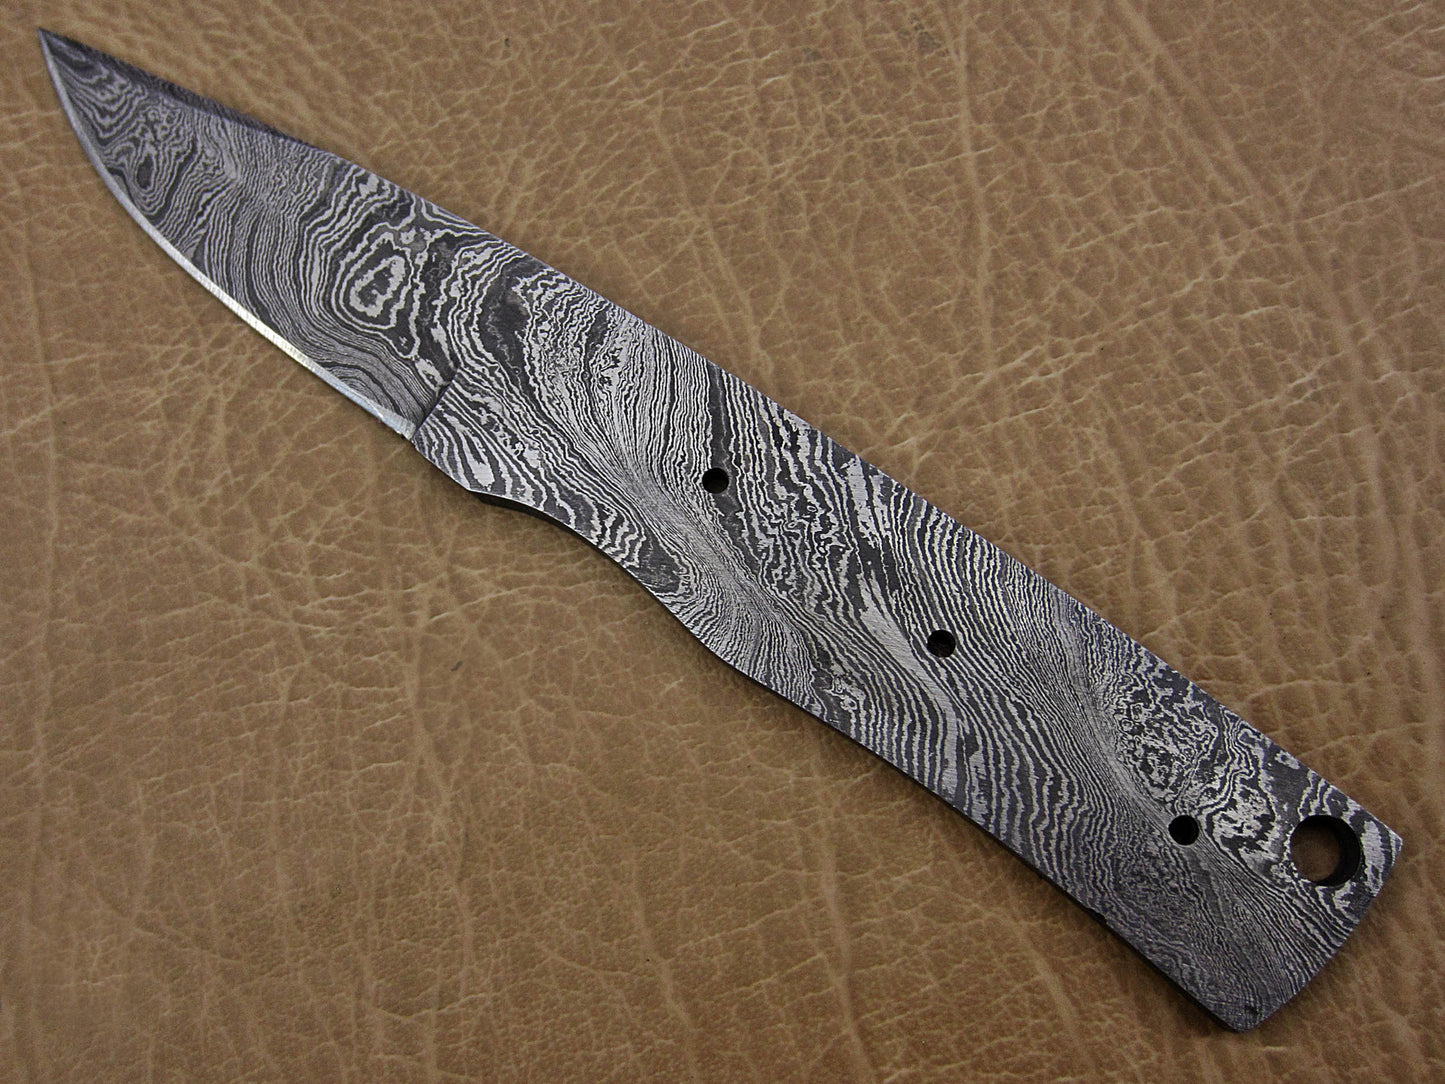 10" Long hand forged Twist pattern full tang Damascus steel hunting Knife blank blade with 4.5" cutting edge, Up to 4.5 Inches scale insert (Copy)